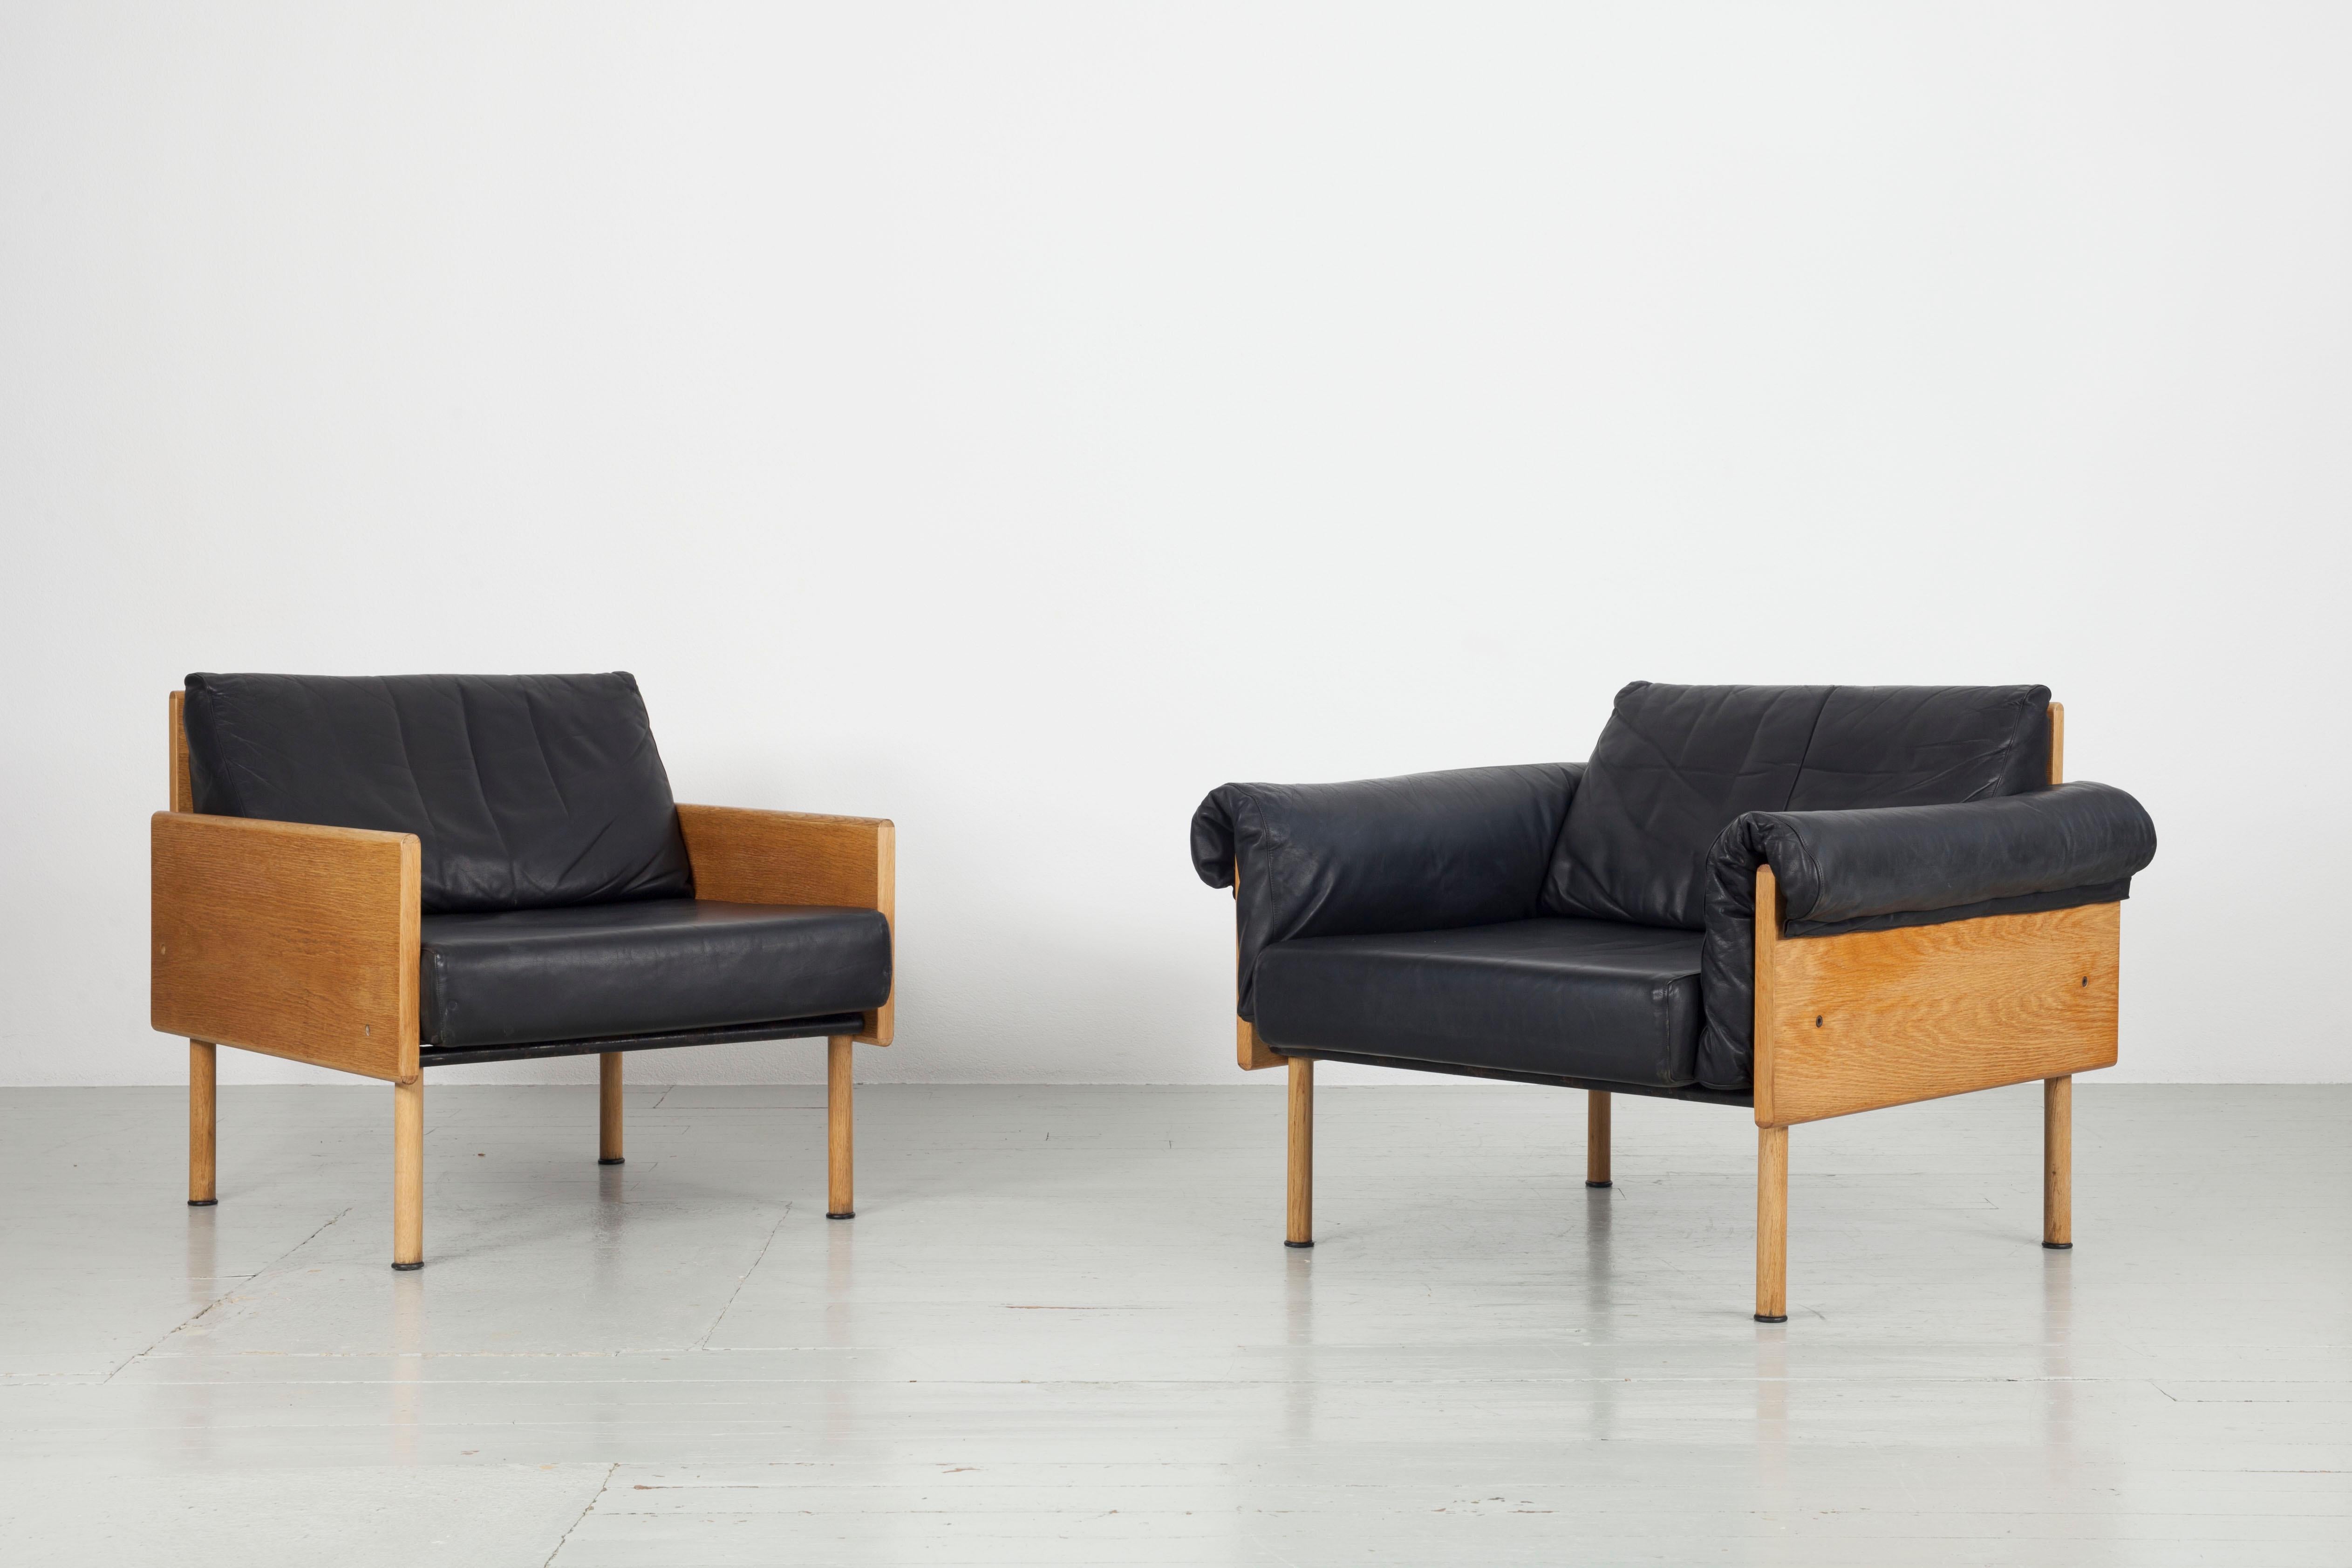 Set of 2 Sofas and 2 Chairs, by Yrjö Kukkapuro for Haimi Finland, 1963 For Sale 12